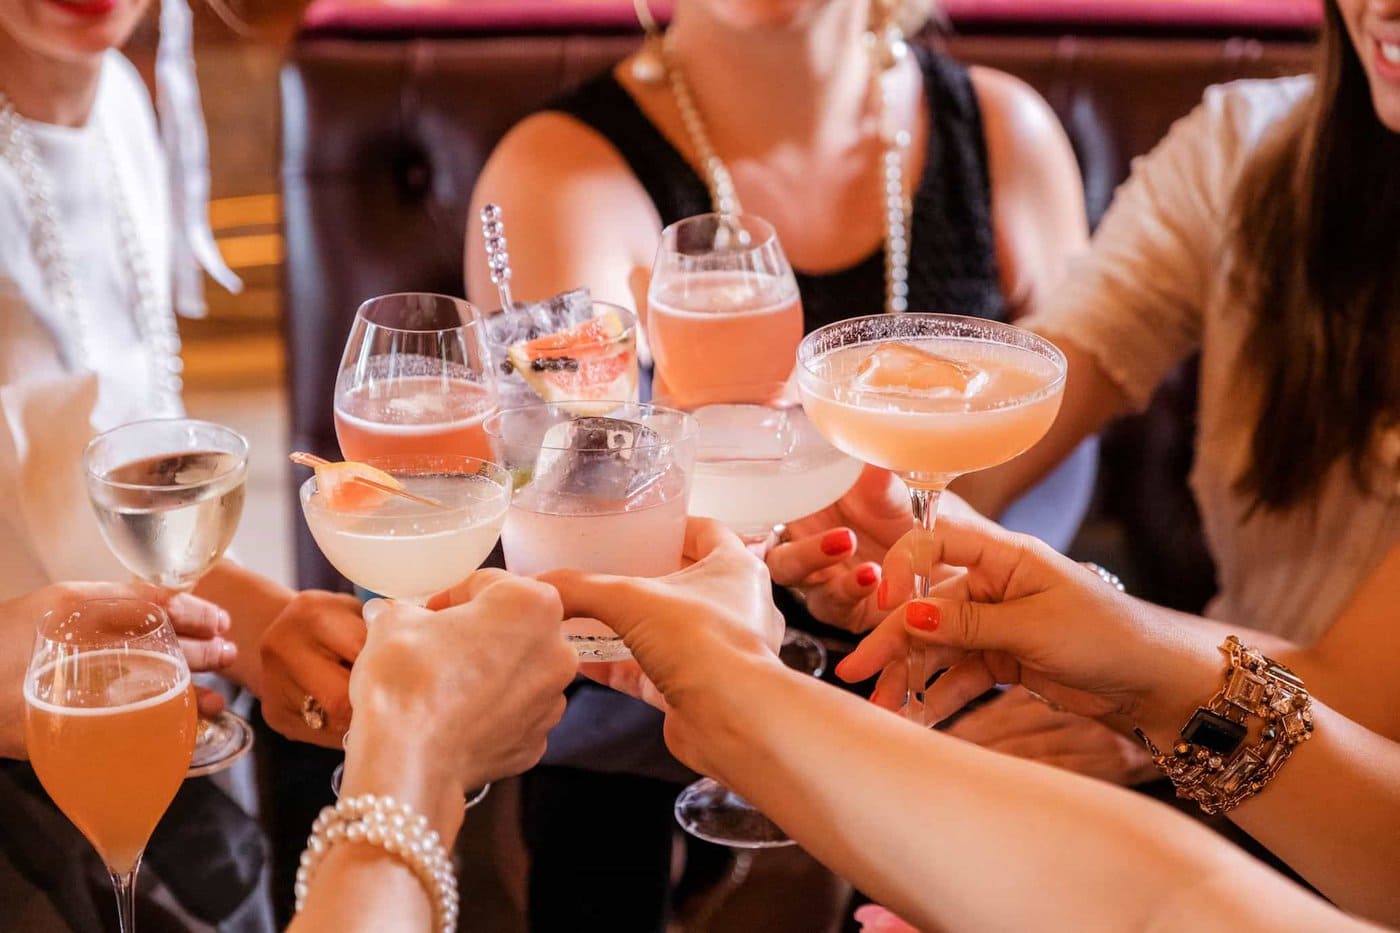 Group of women cheering with different pink and clear drinks